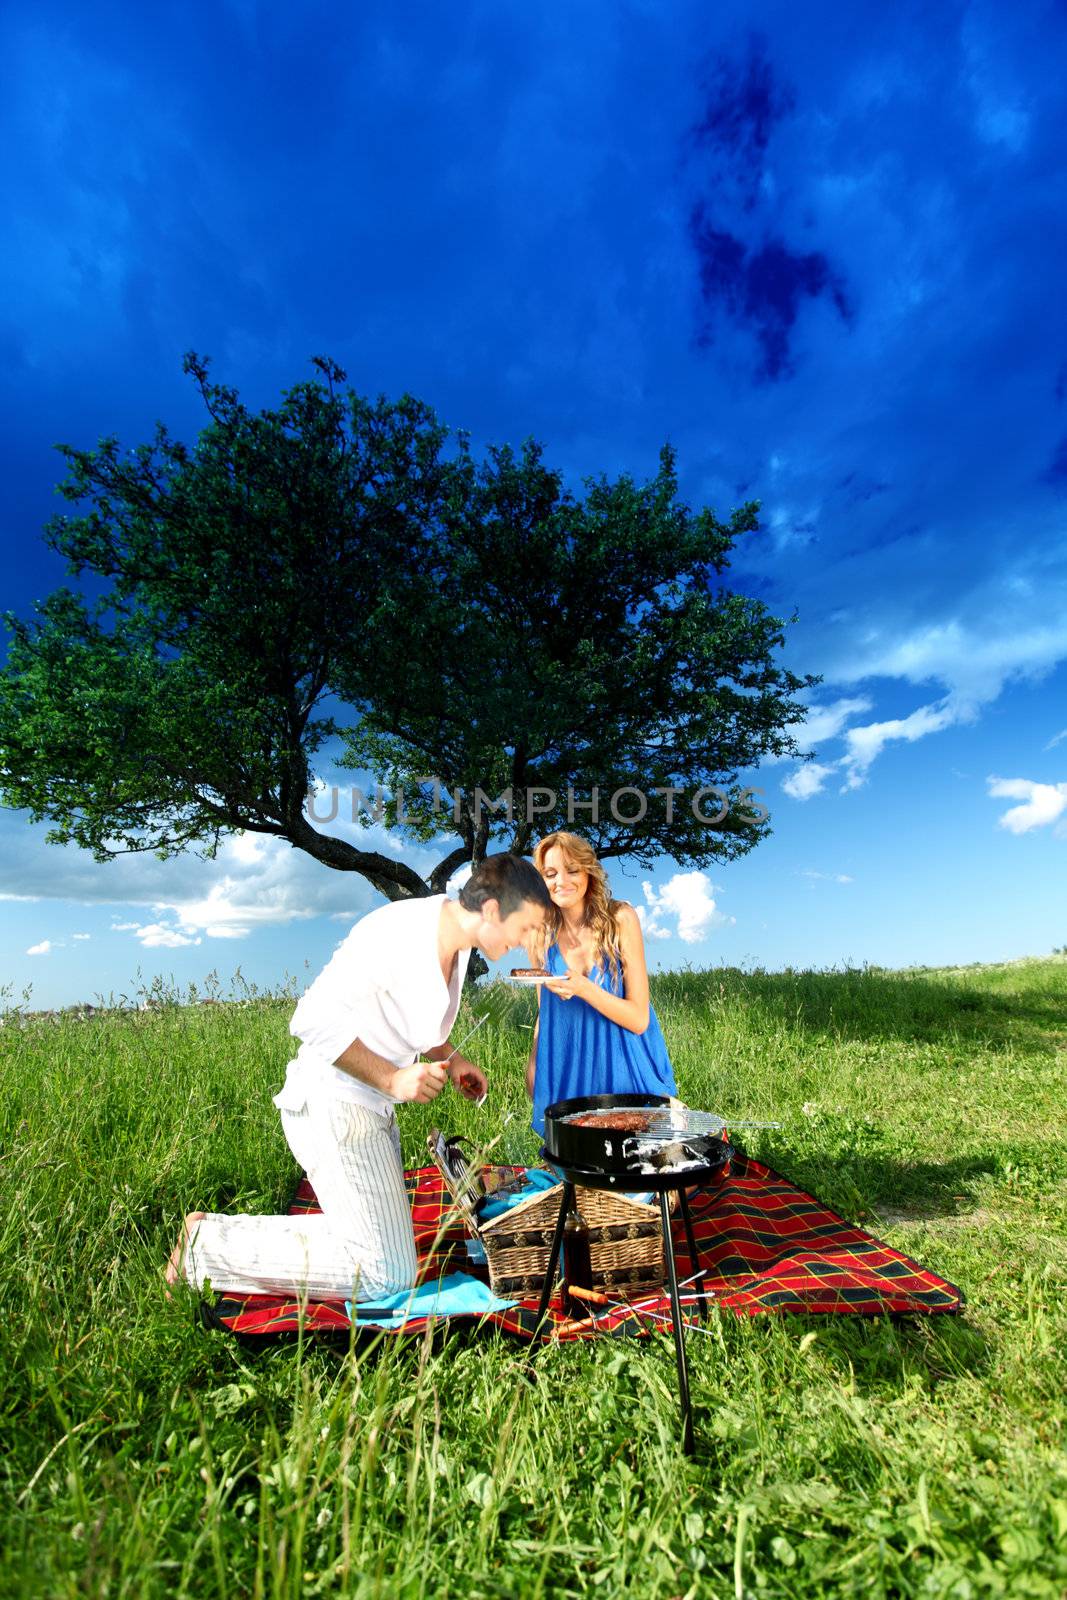 man and woman on picnic in green grass